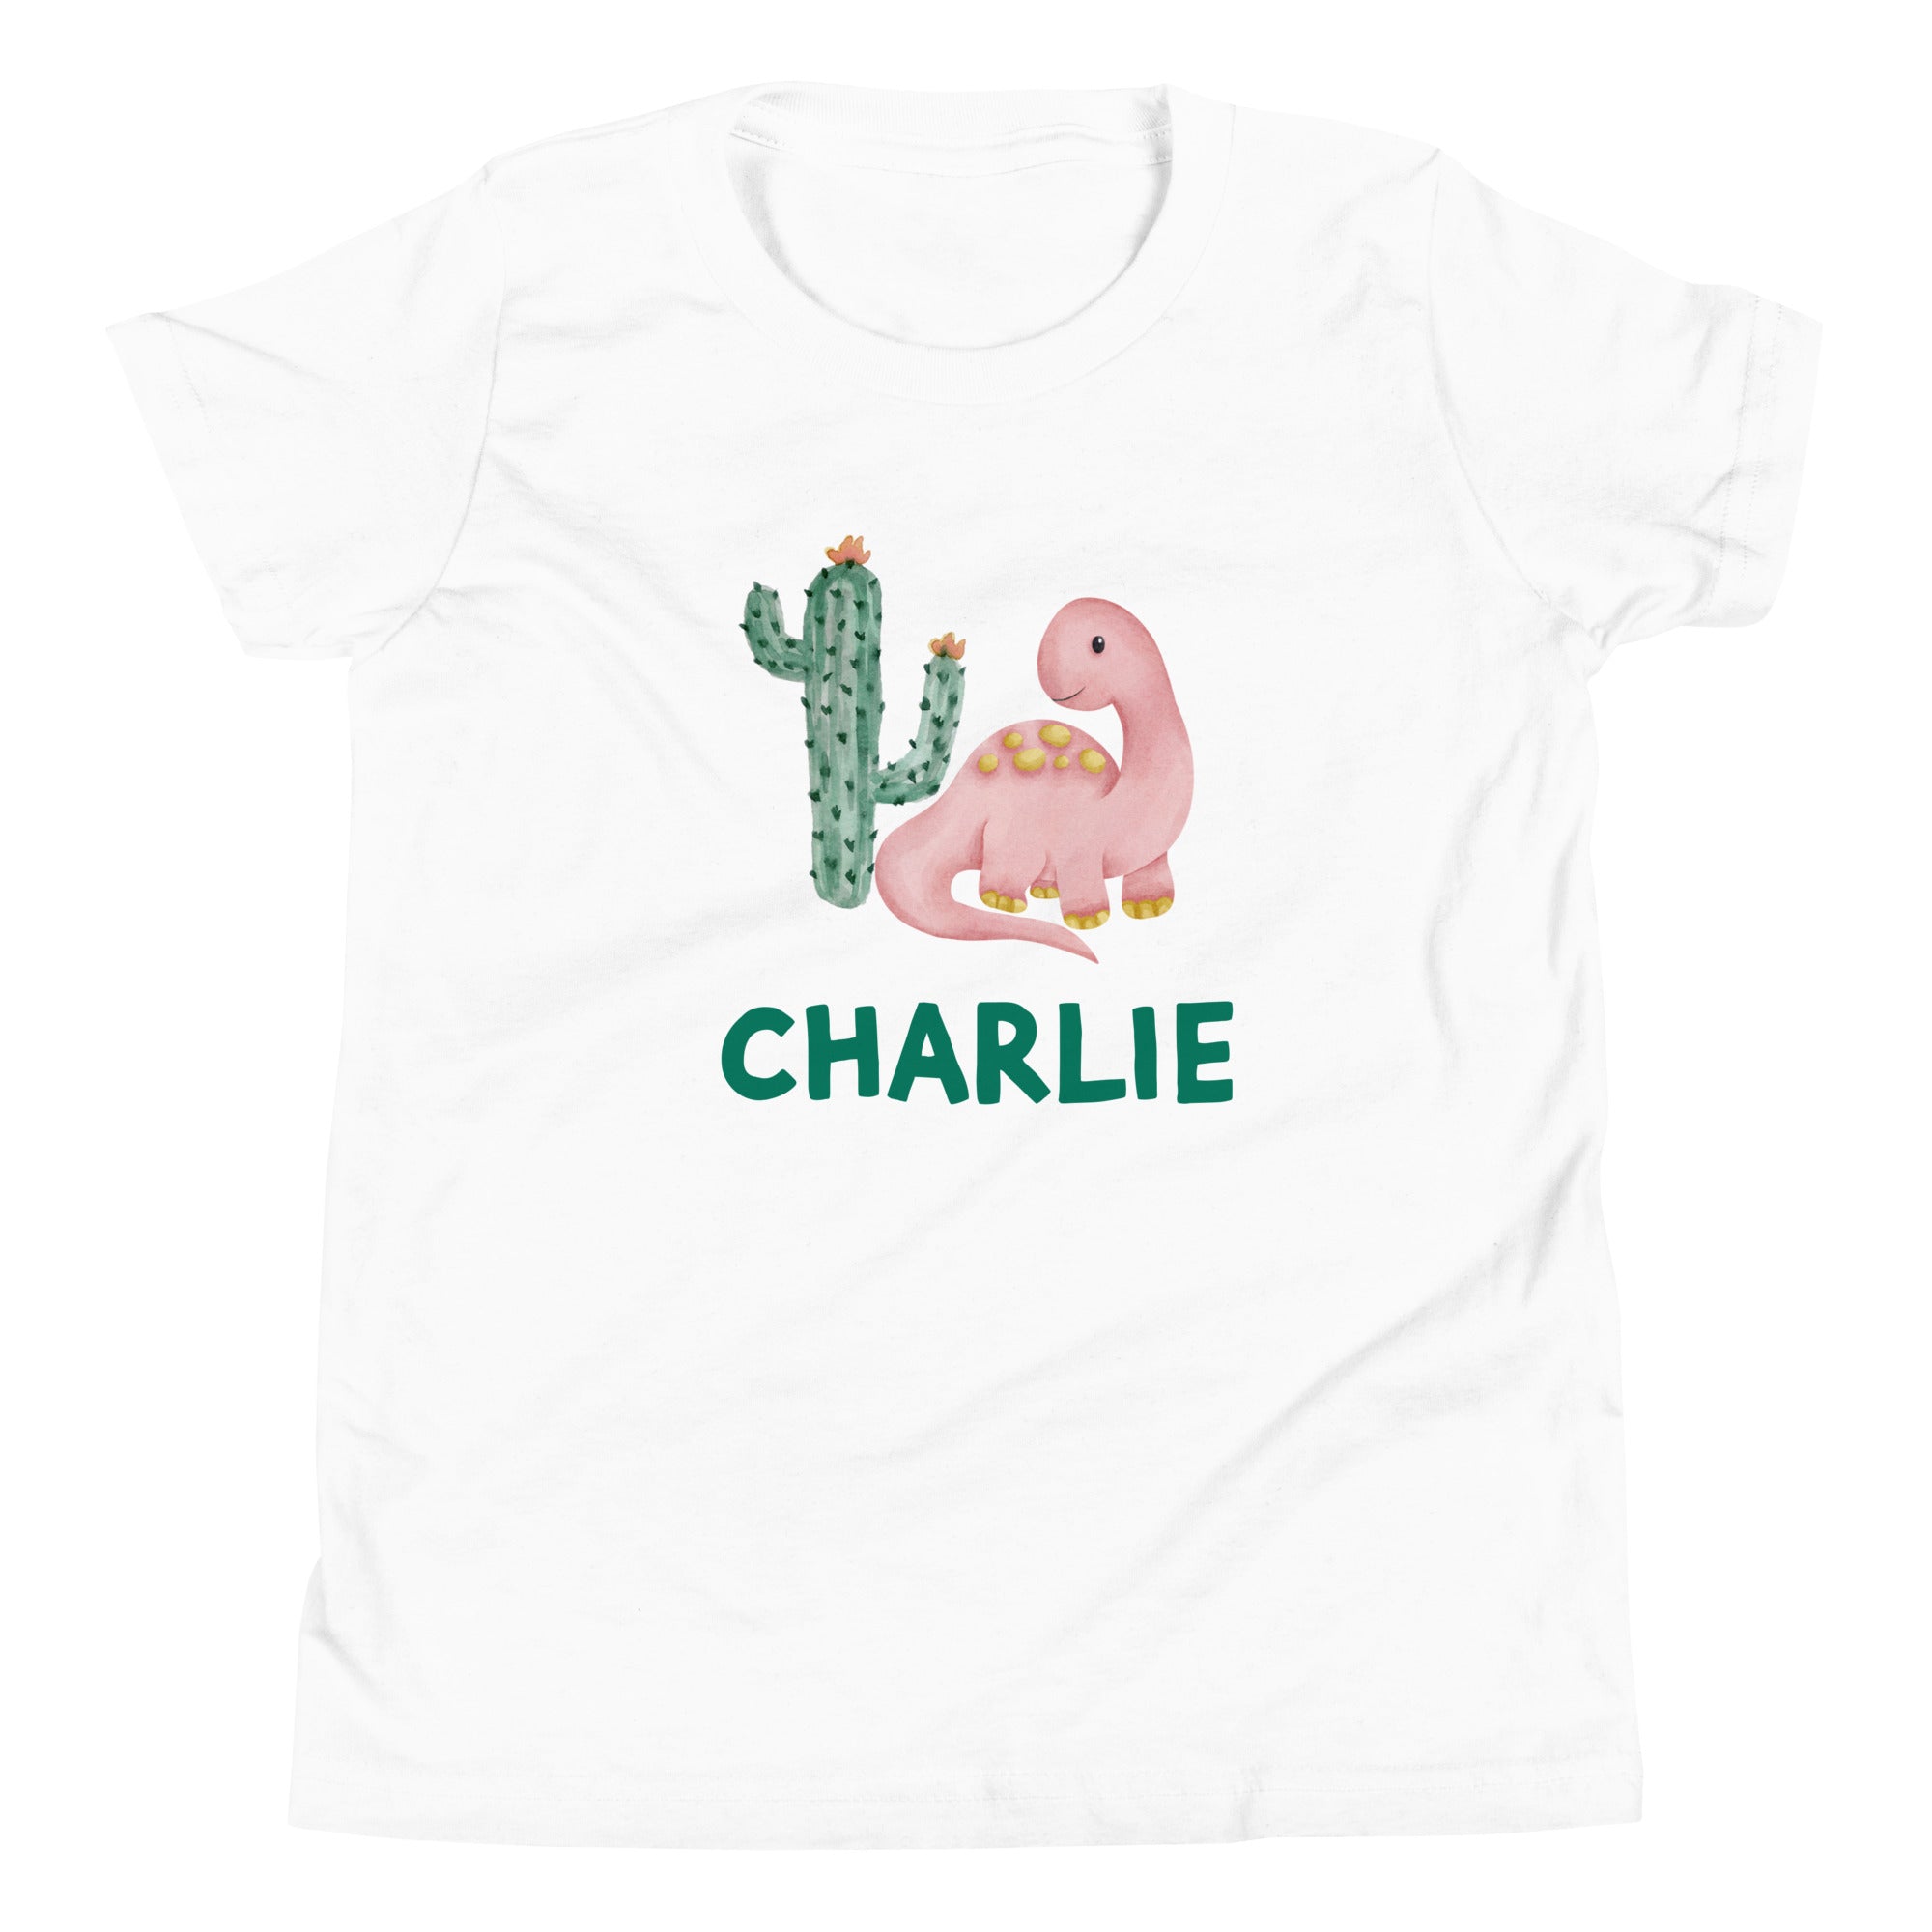 Kids personalize shirt with a cute pink dinosaur